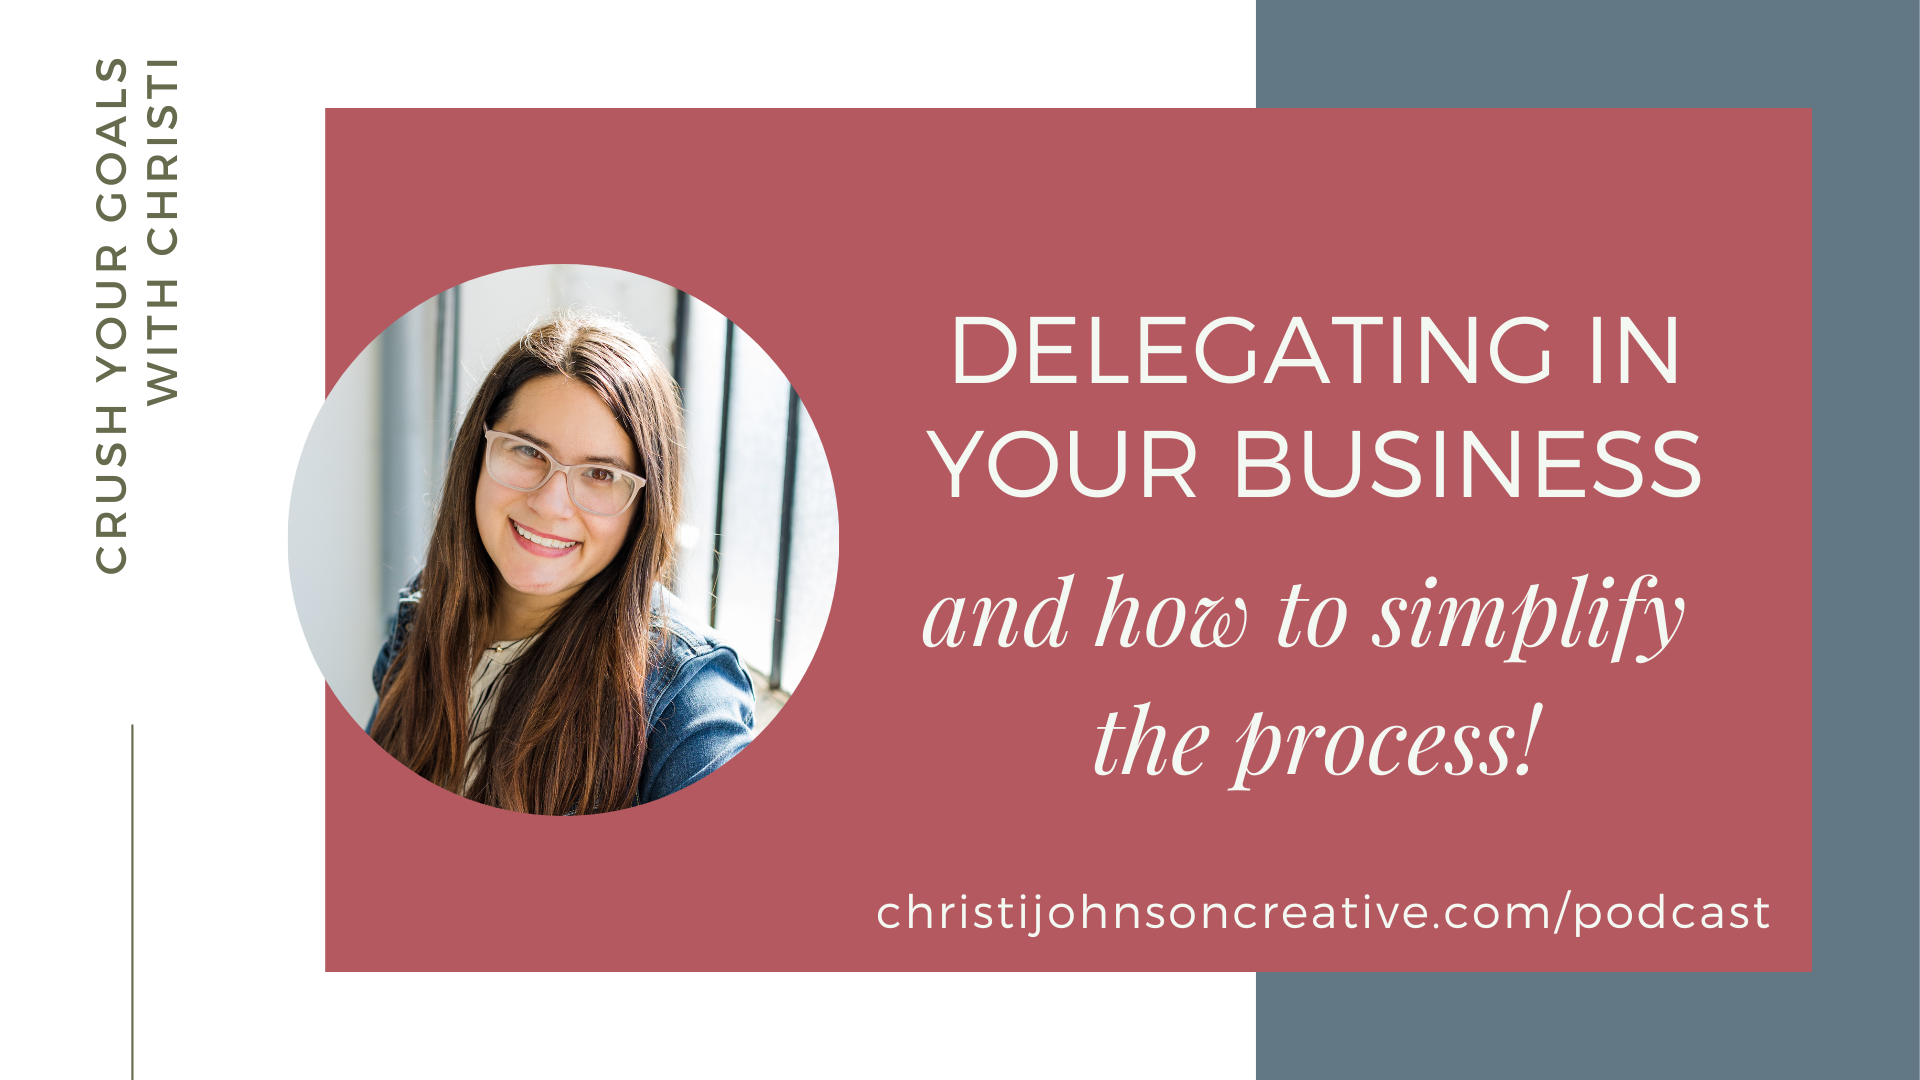 Delegating in Your Business is written in white text on a pink background. There is a photo fo Christi wearing a denim jacket smiling at the camera.